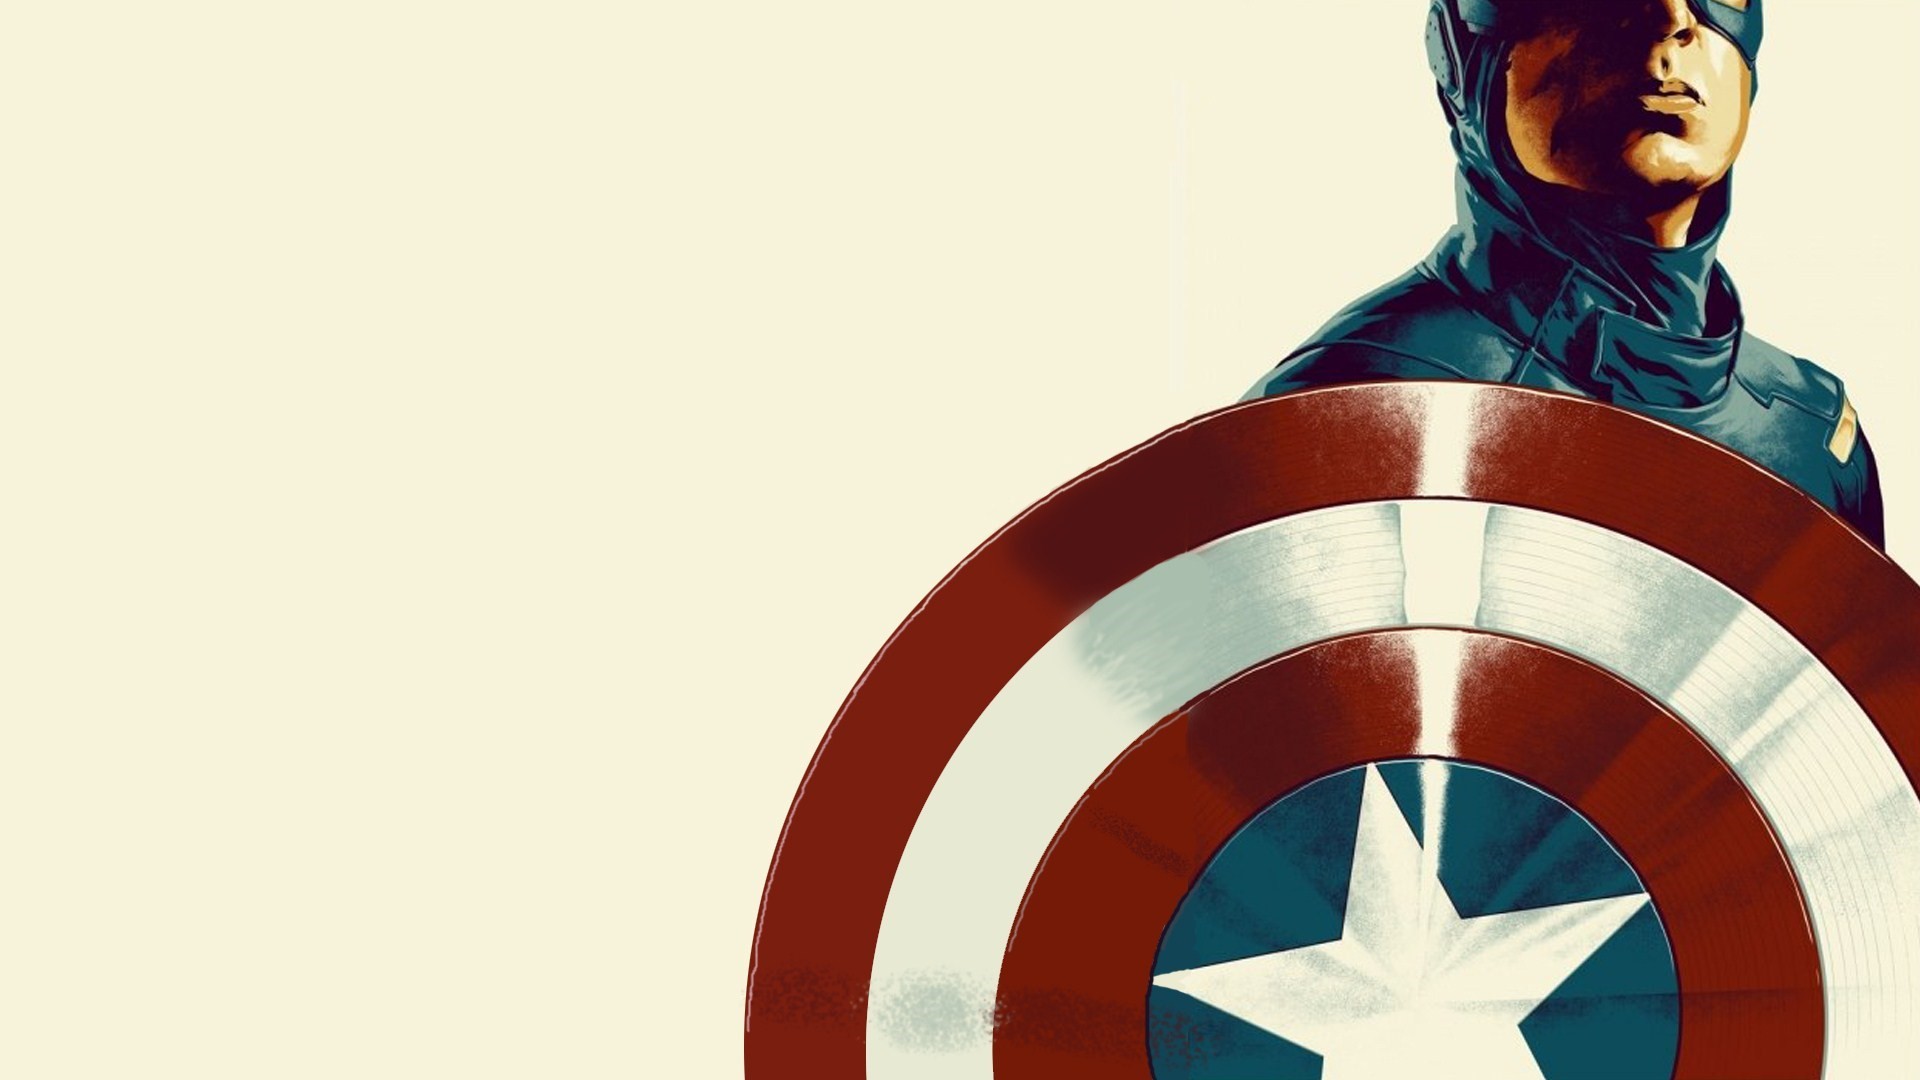 1920x1080 Captain America HD Wallpapers. Captain America HD Wallpapers 